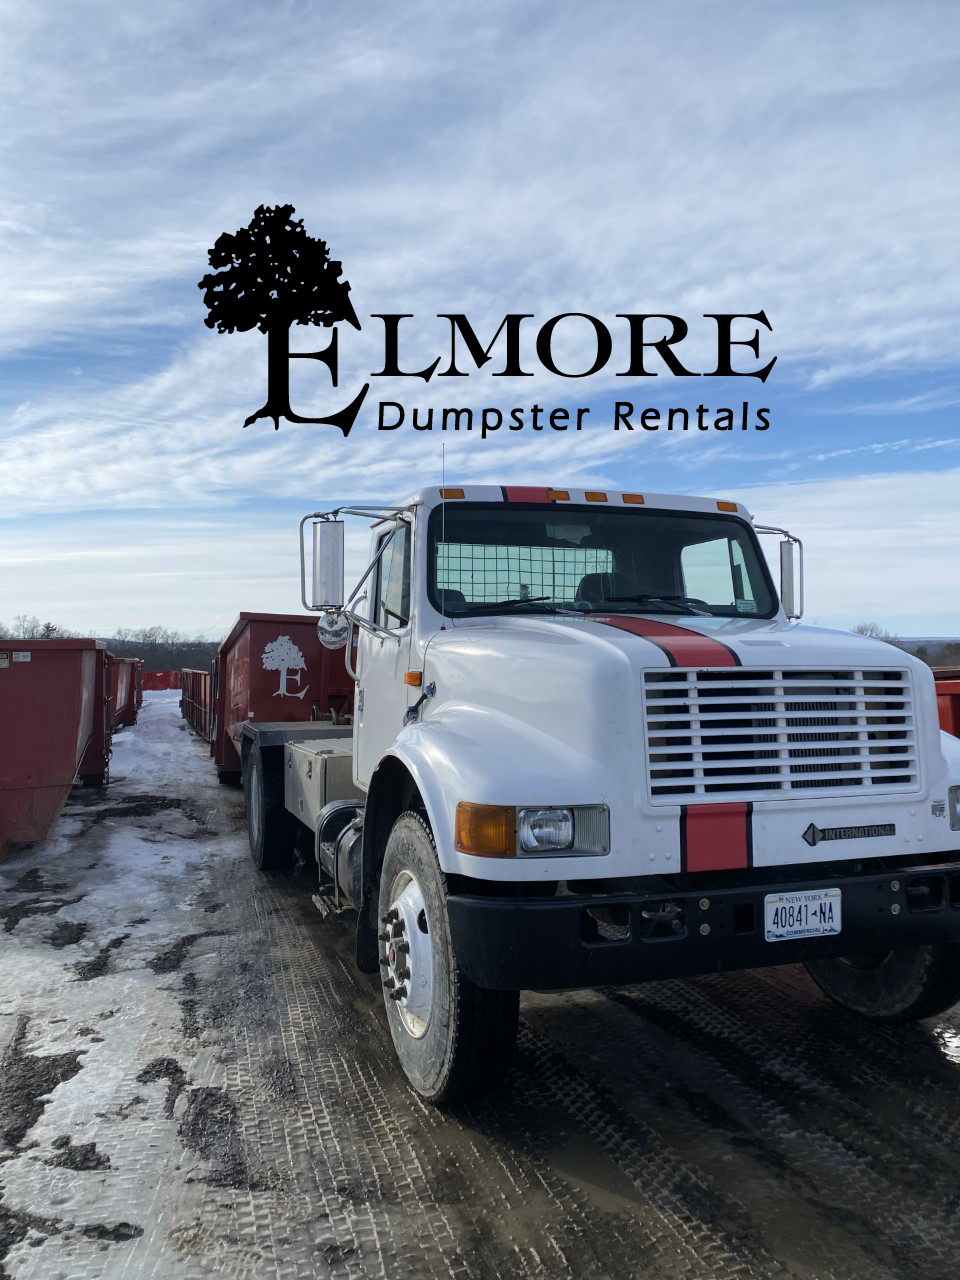 Construction Dumpster Rental Elmore Dumpster Rentals Montour NY Contractors Use Year Round